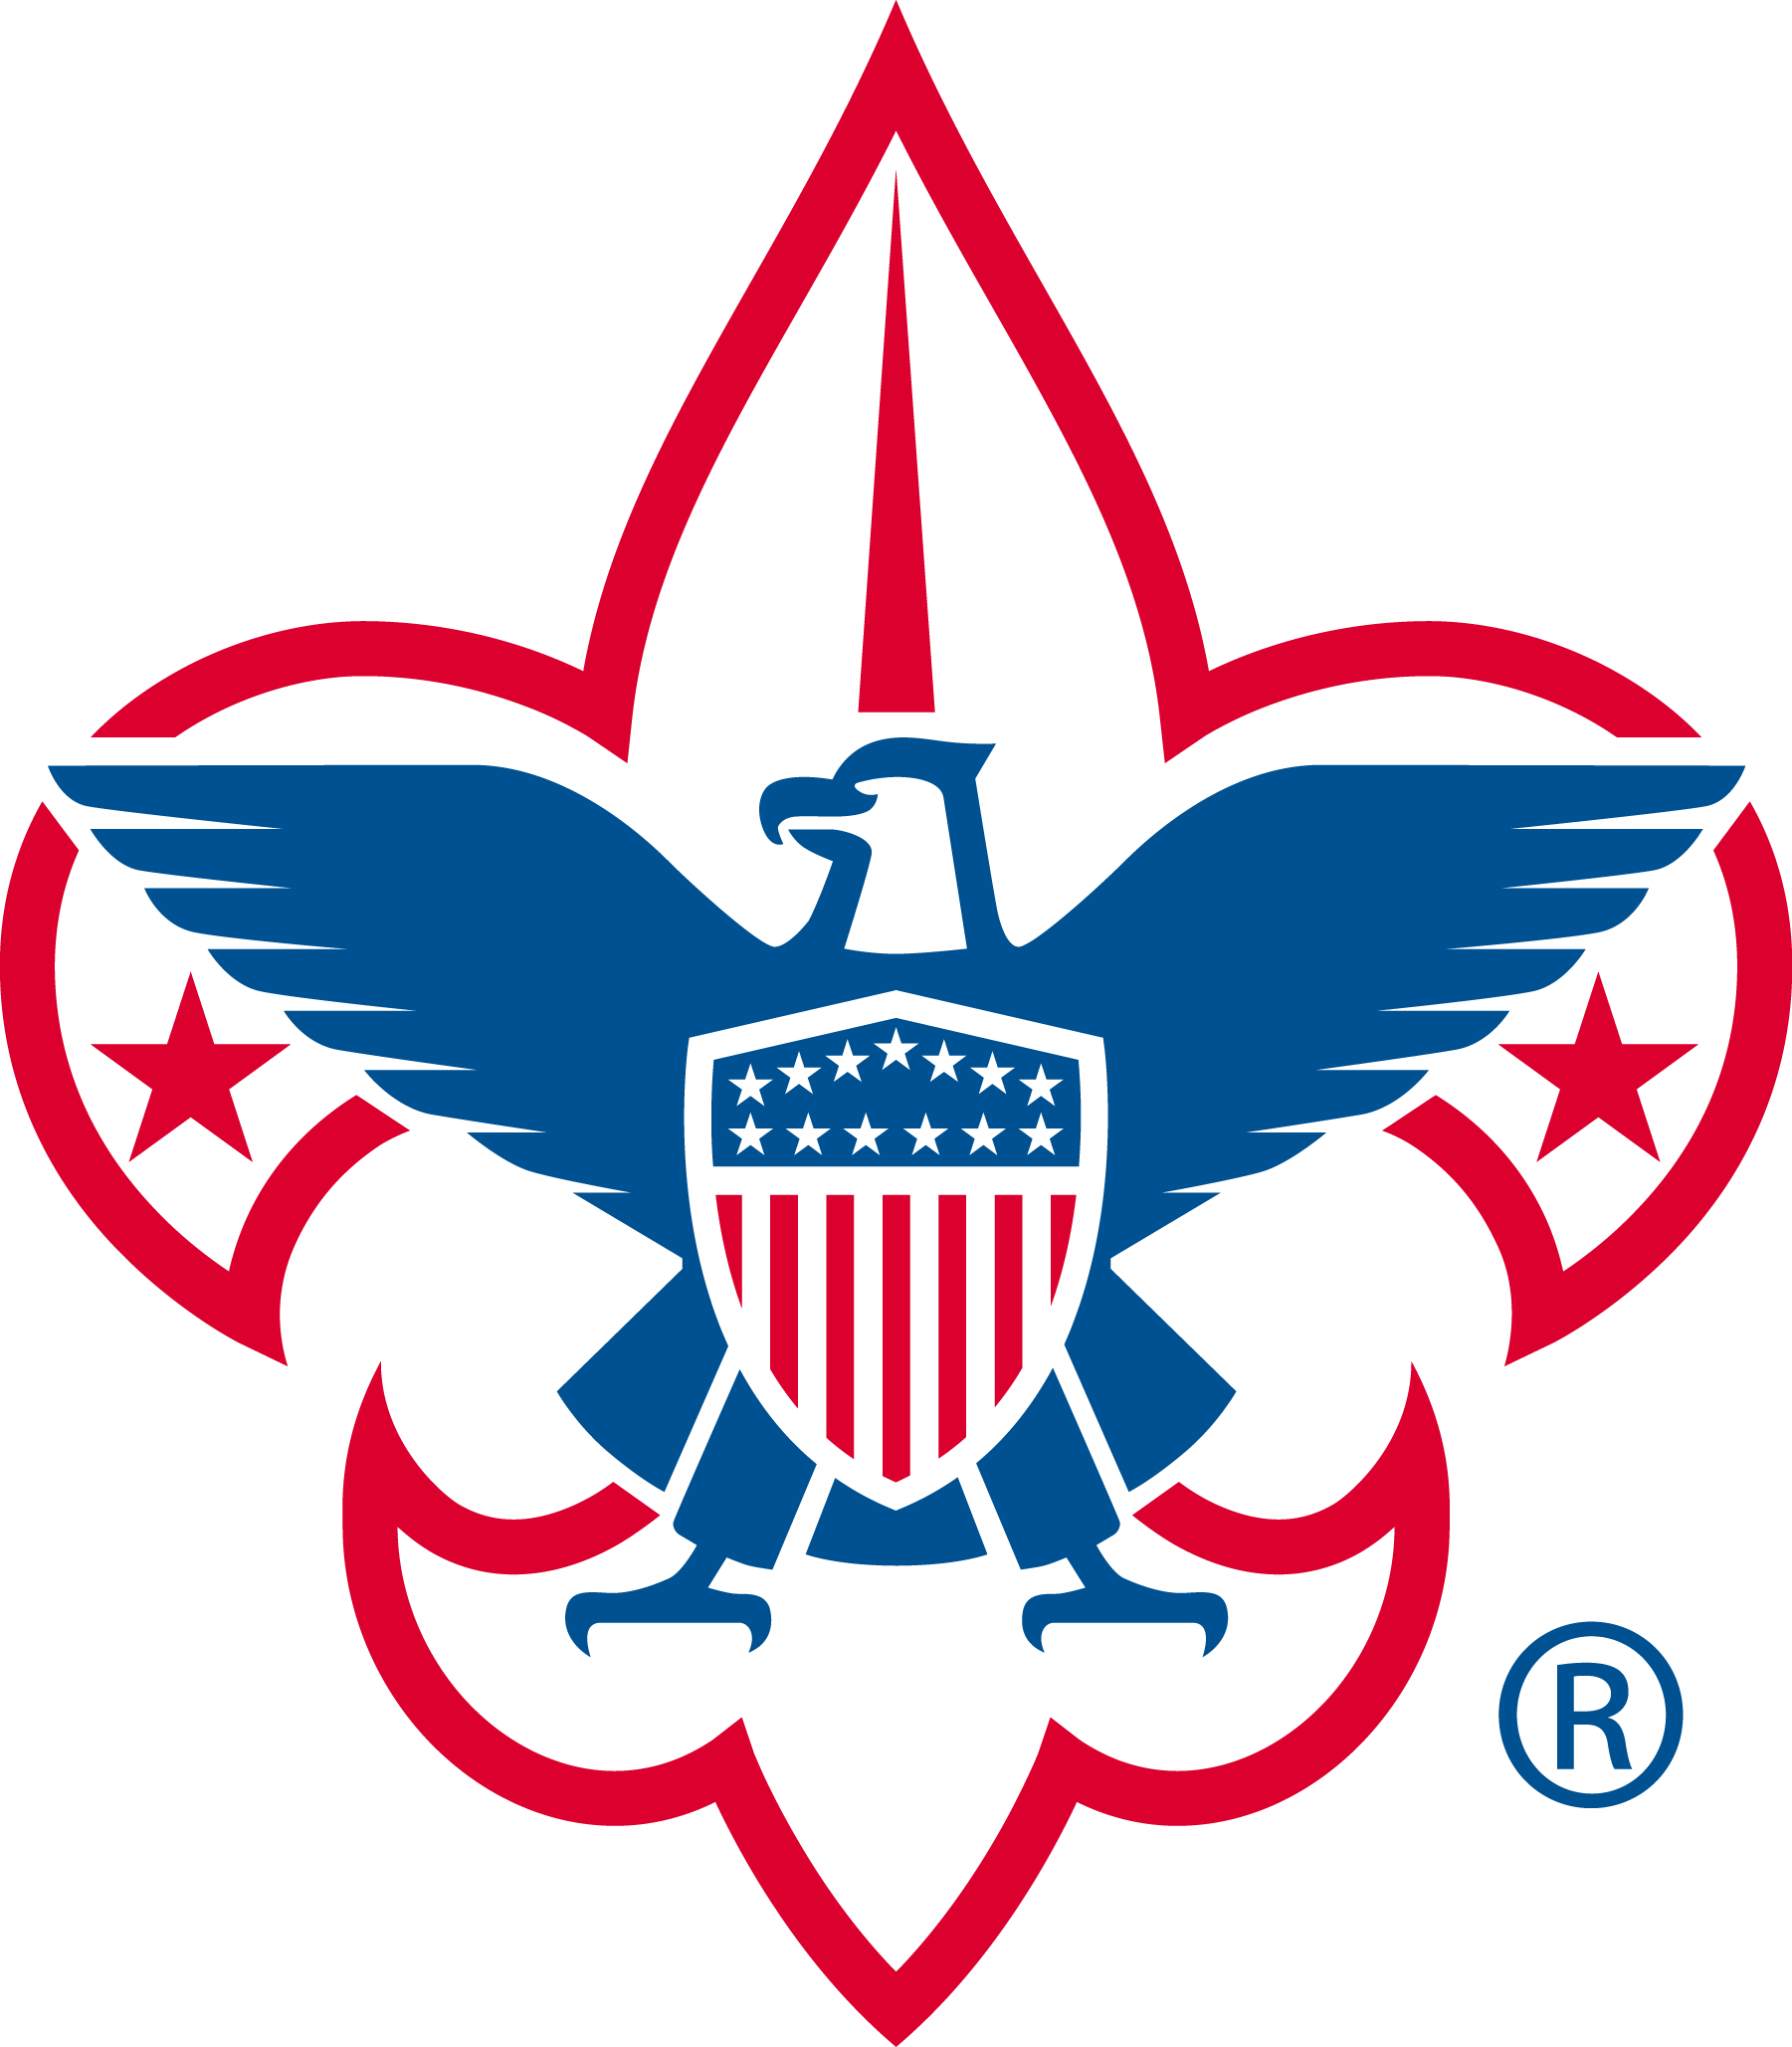 Save - Boy Scouts Of America (1801x2057)